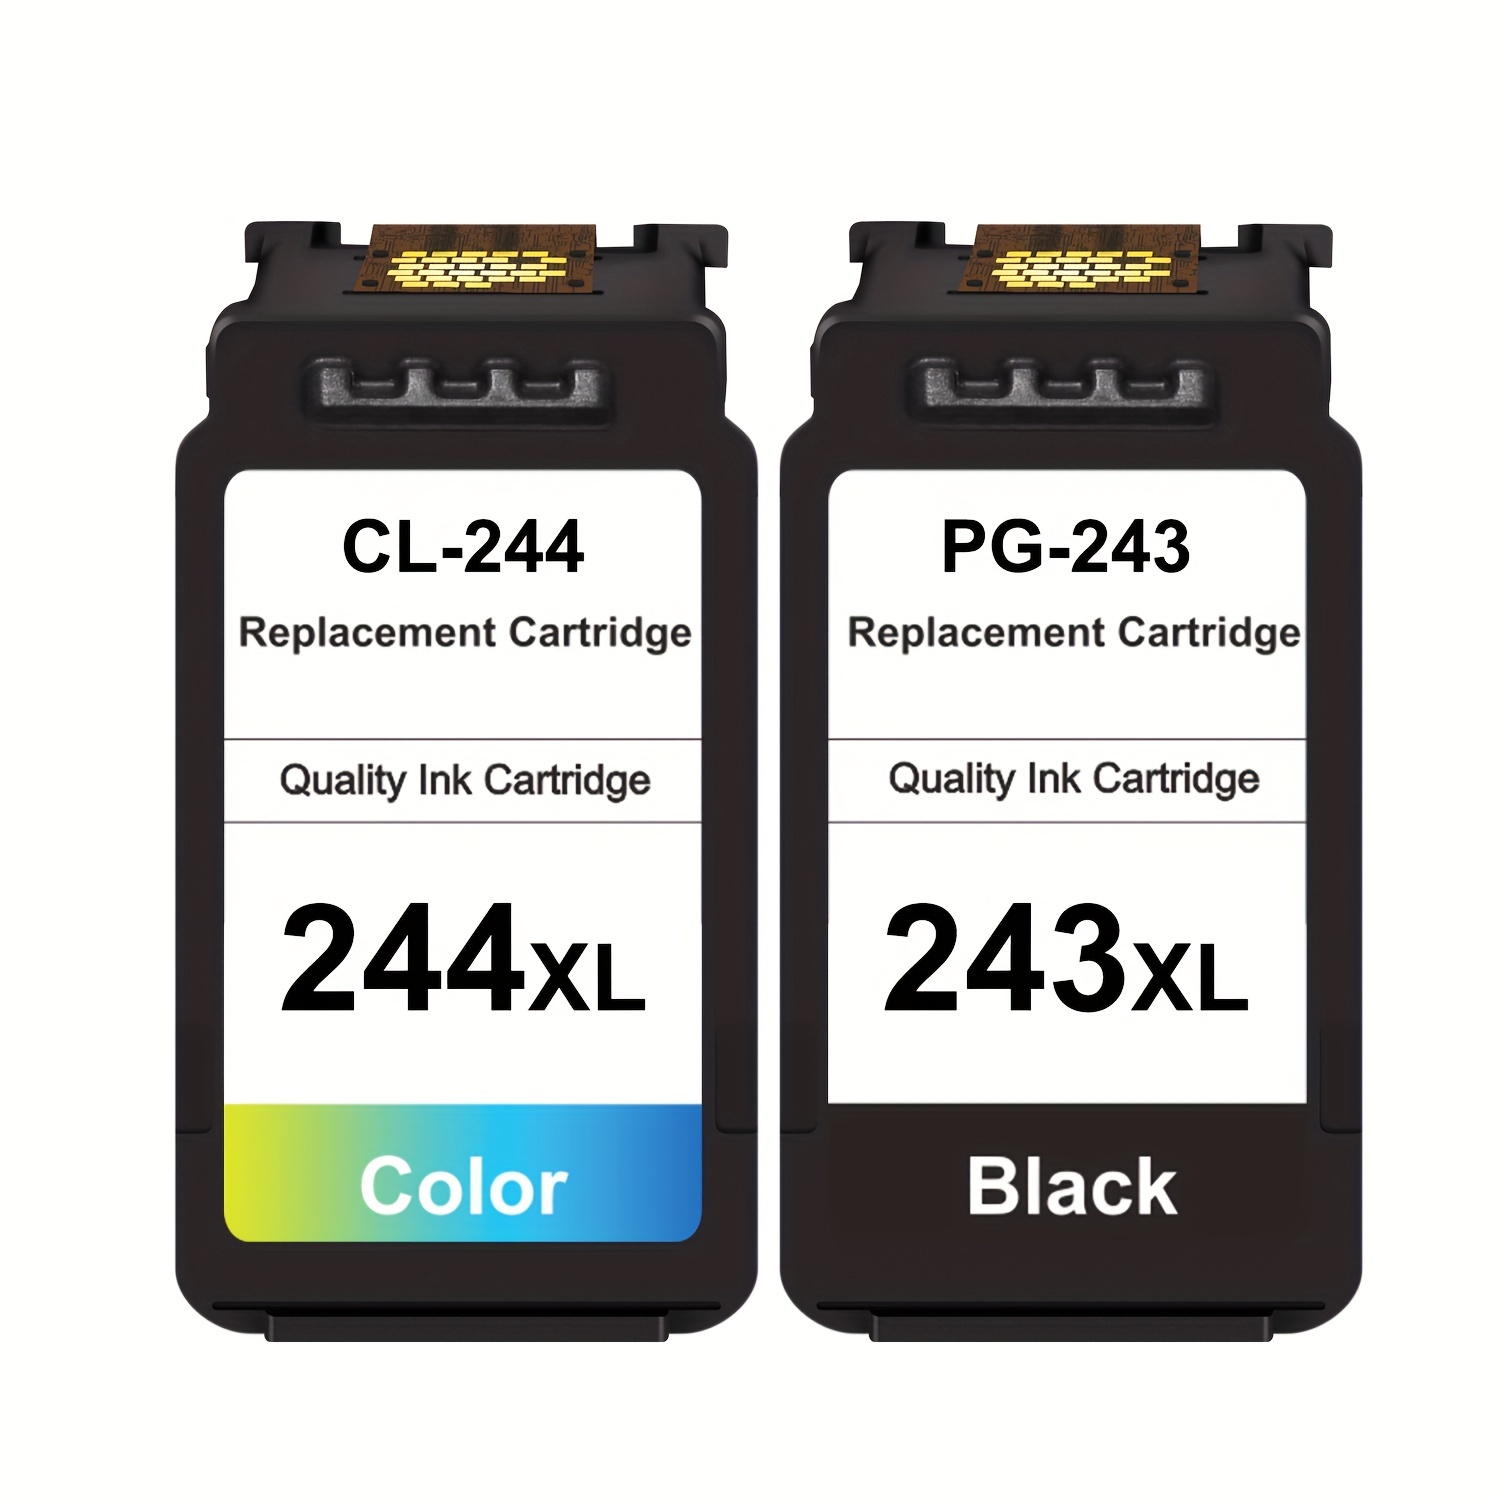 4x100ml Refill ink Canon PG-275 CL-276 Ink Cartridges Black Color TS3520  TS3522